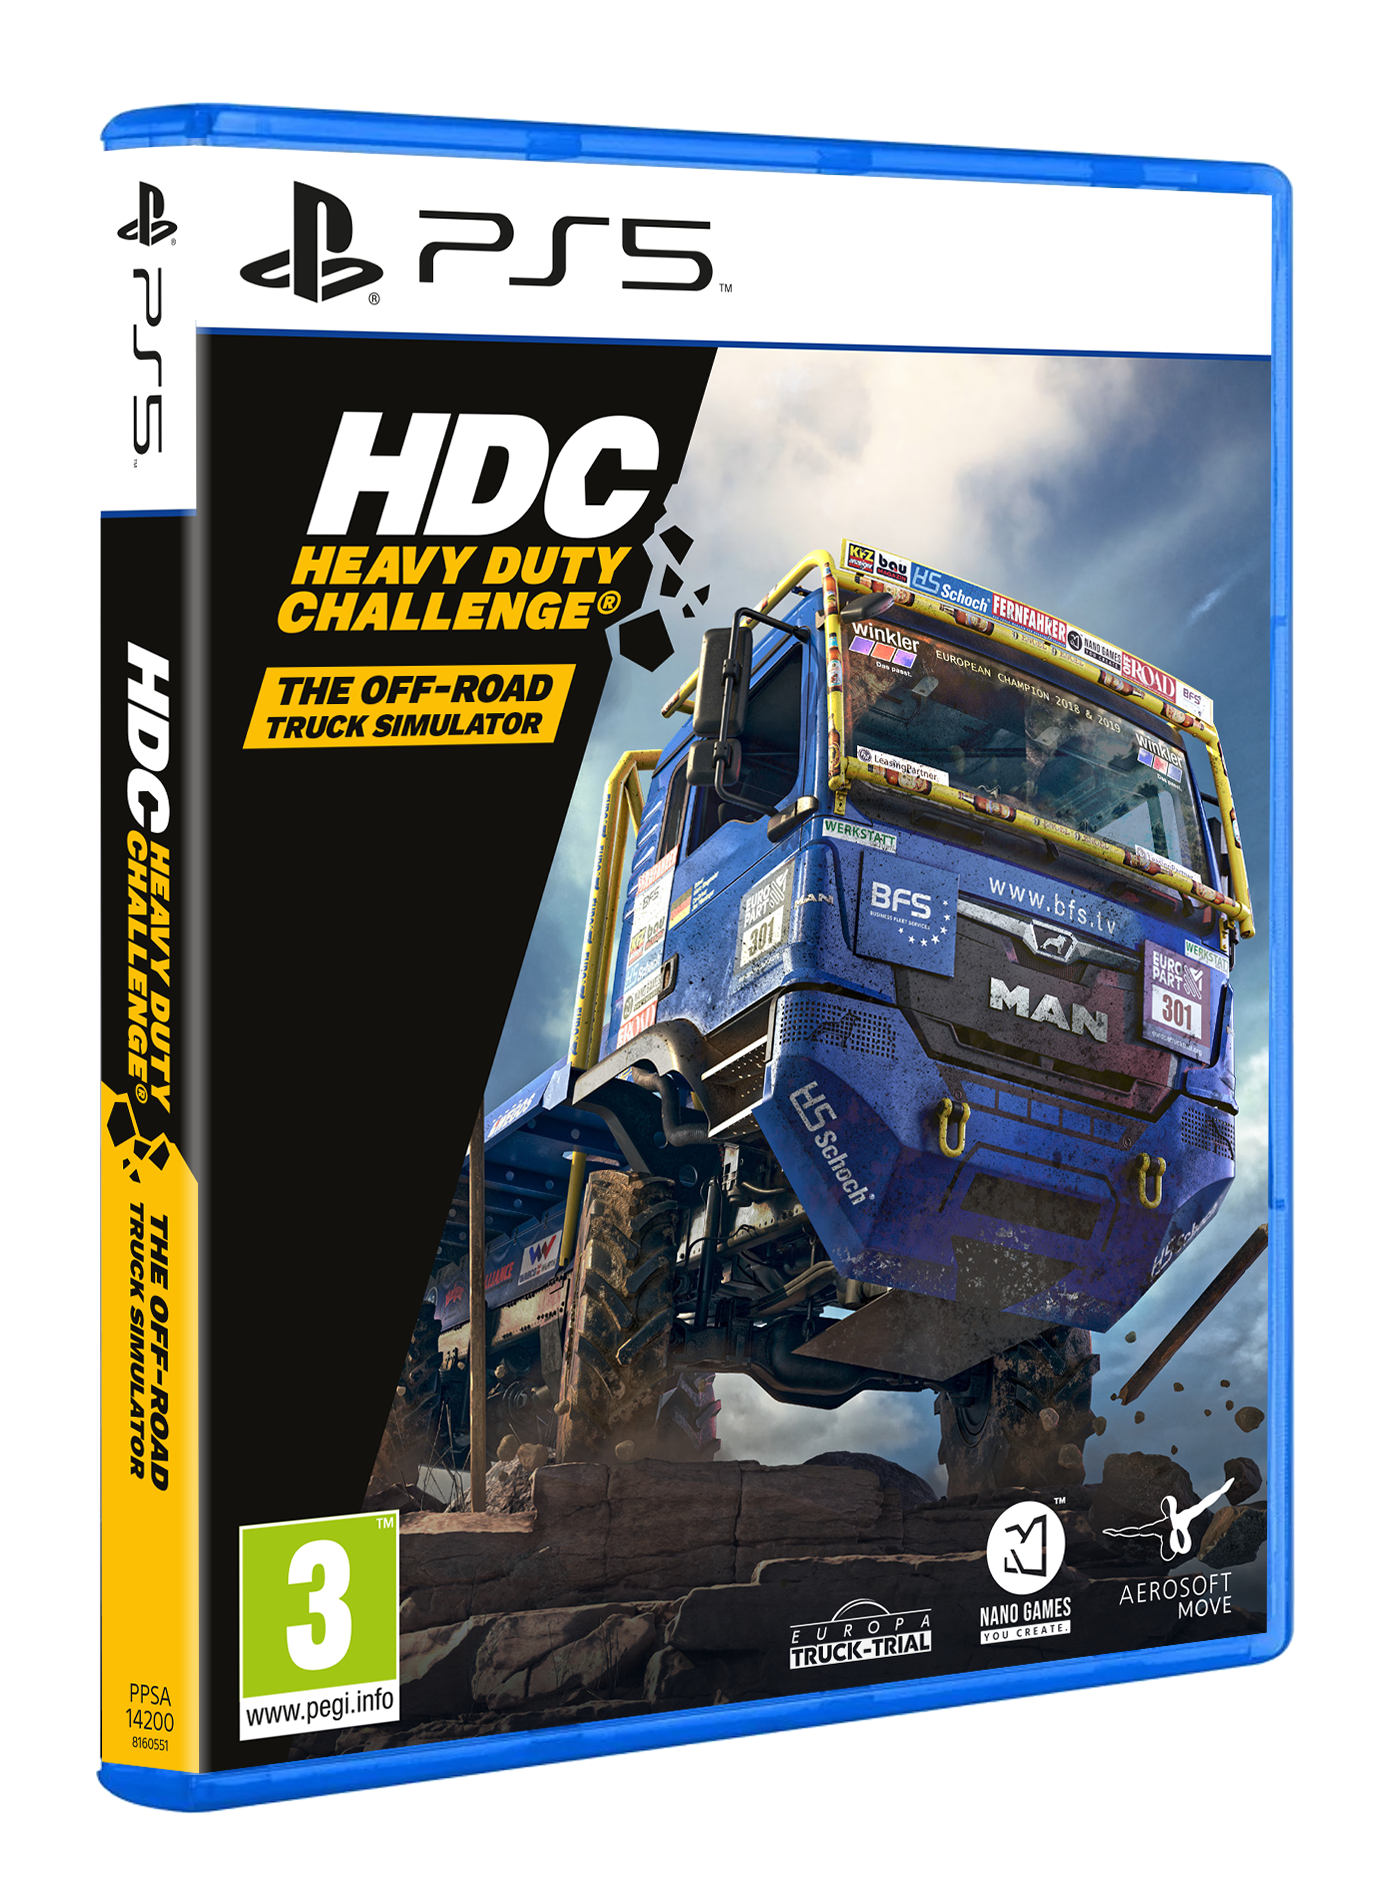 Buy Heavy Duty Challenge The off-road Truck Simulator - Free shipping